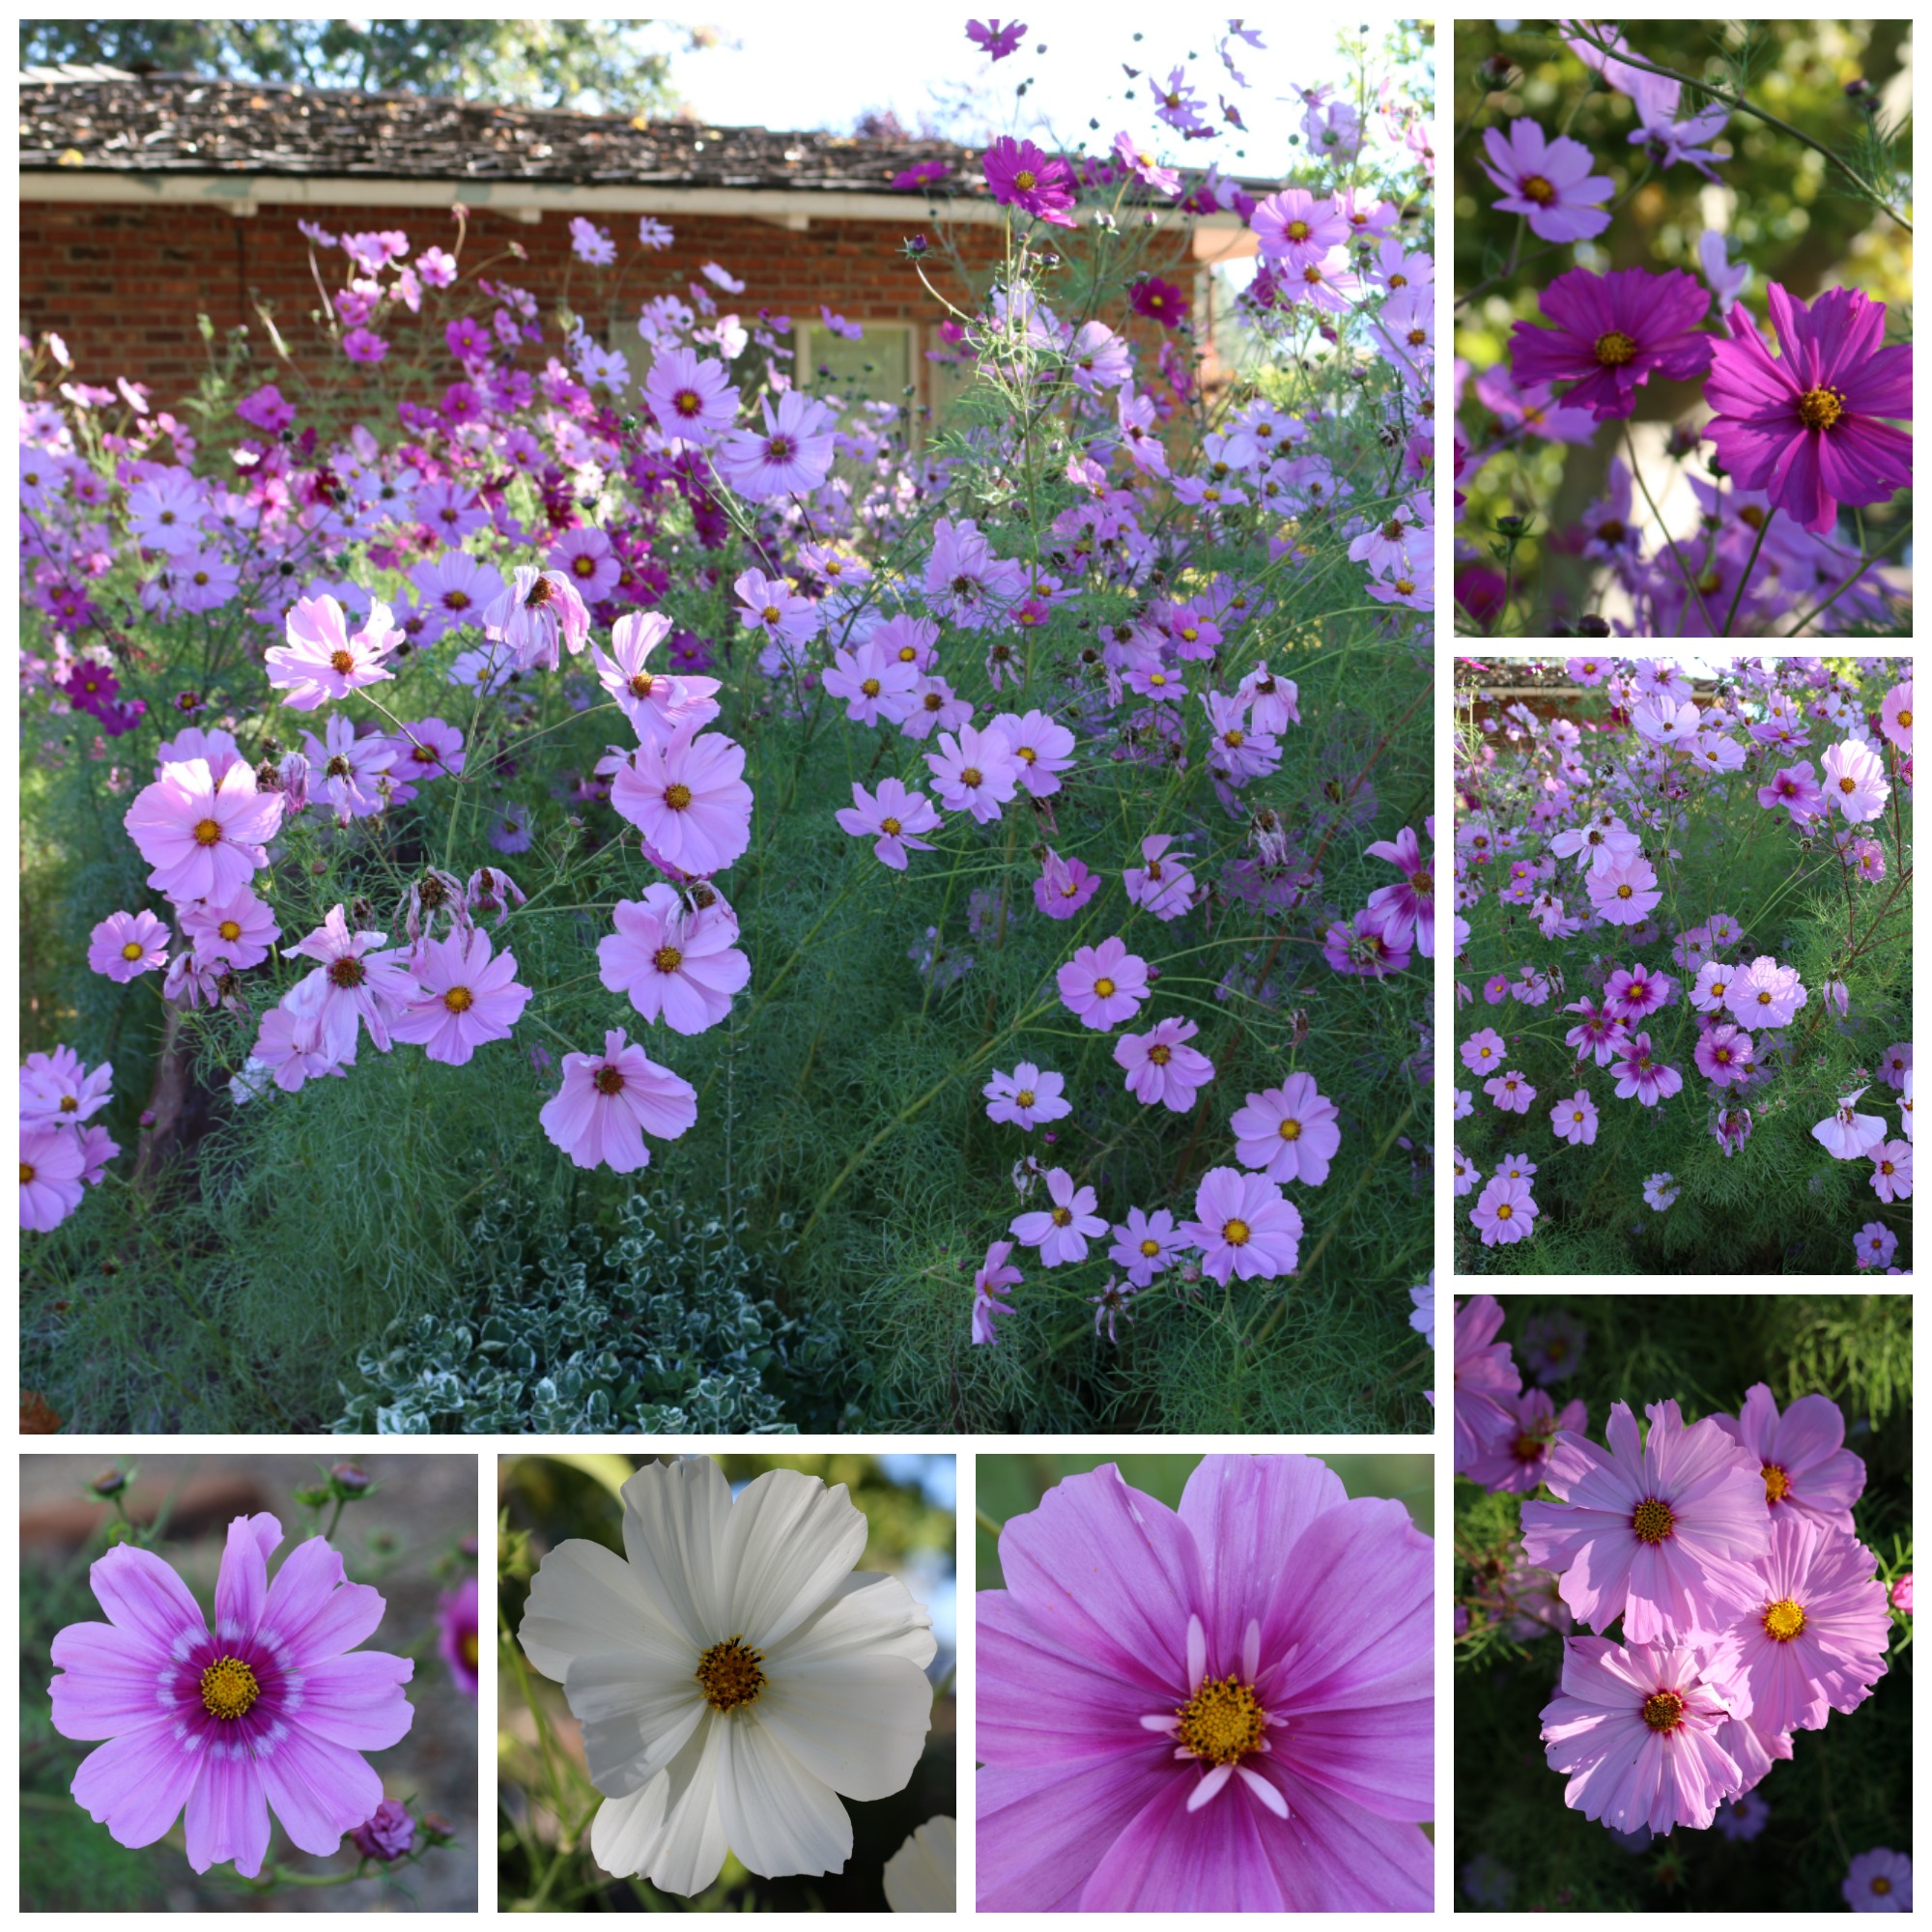 My cosmos are the most beautiful I have ever seen. I planted them in remembrance of my late Mother Katherine, who loved these flowers. They are nearly 7 feet tall. Spectacular!